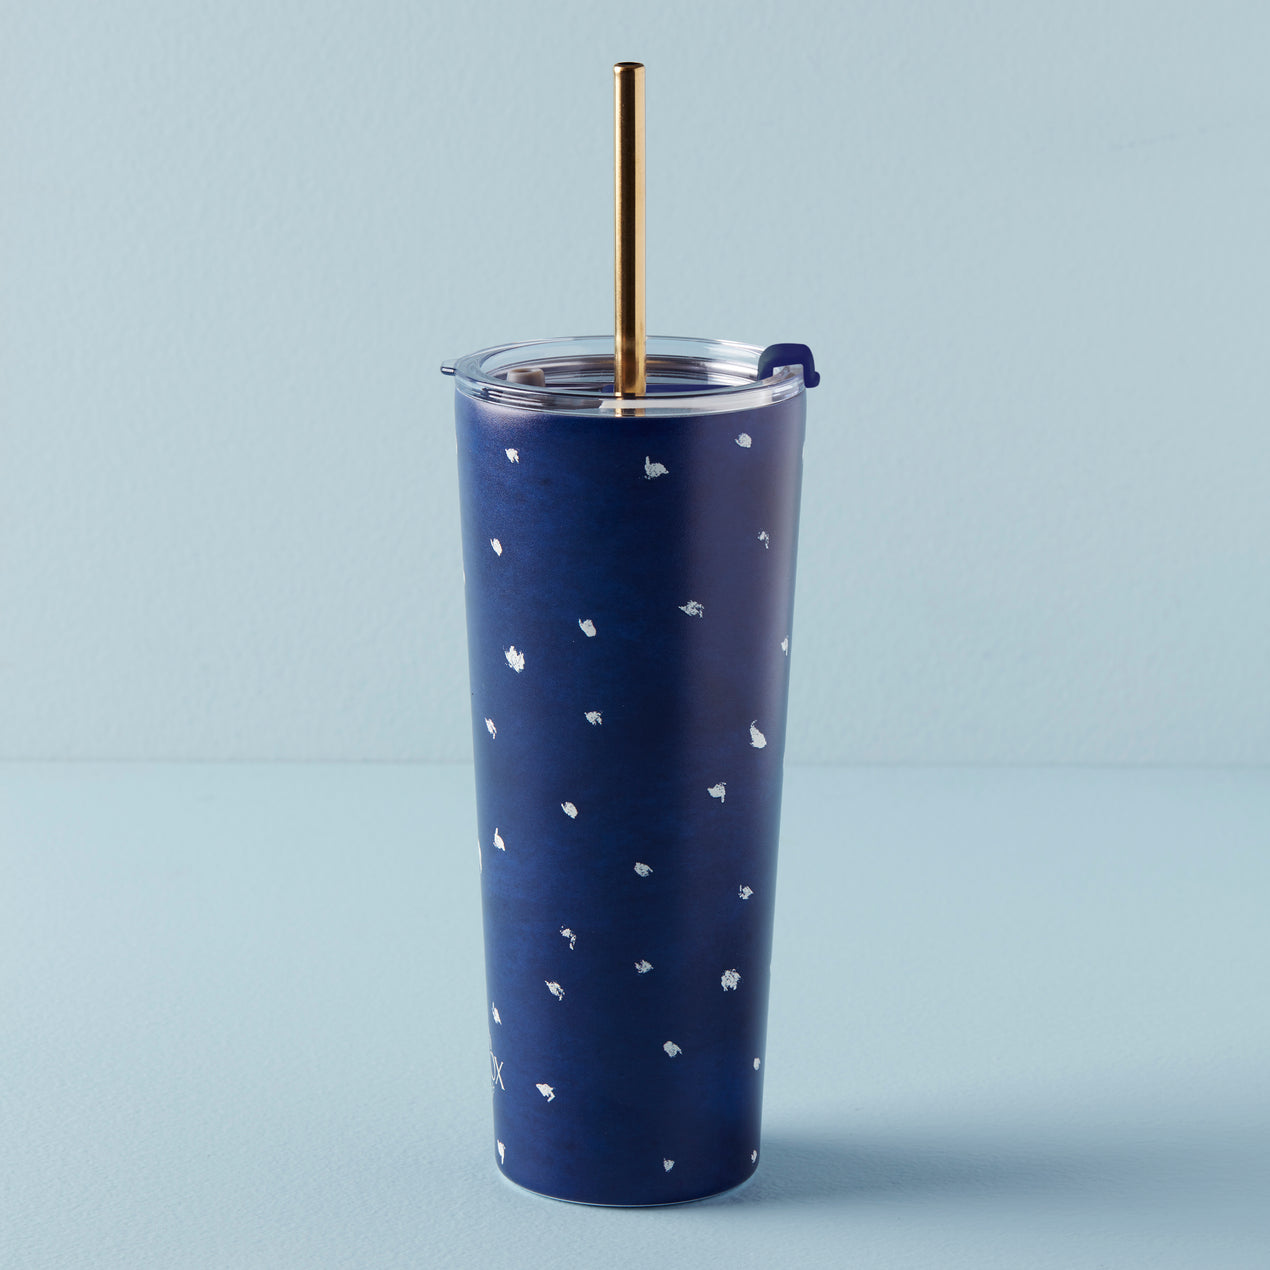 Starbucks Blue Stainless Steel Straw with Straw Stopper For sippy cup  Tumbler